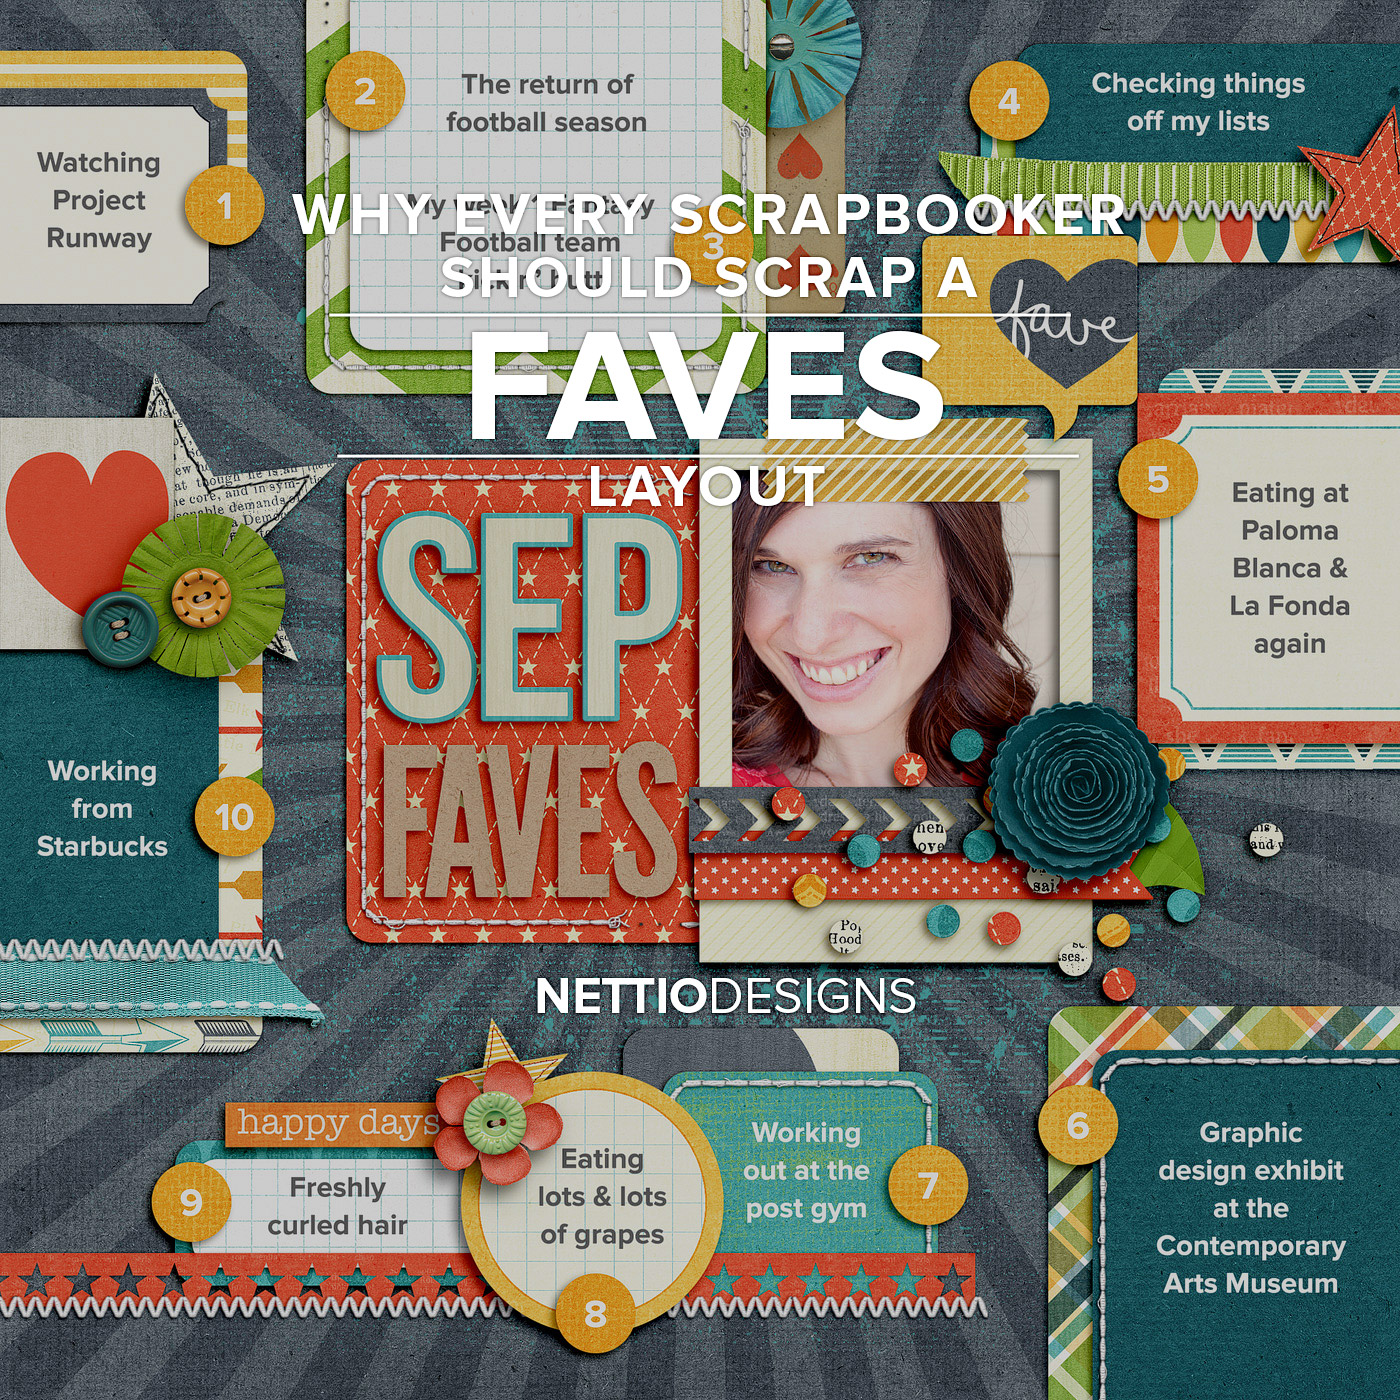 Why Every Scrapbooker Should Scrap A Faves Layout | NettioDesigns